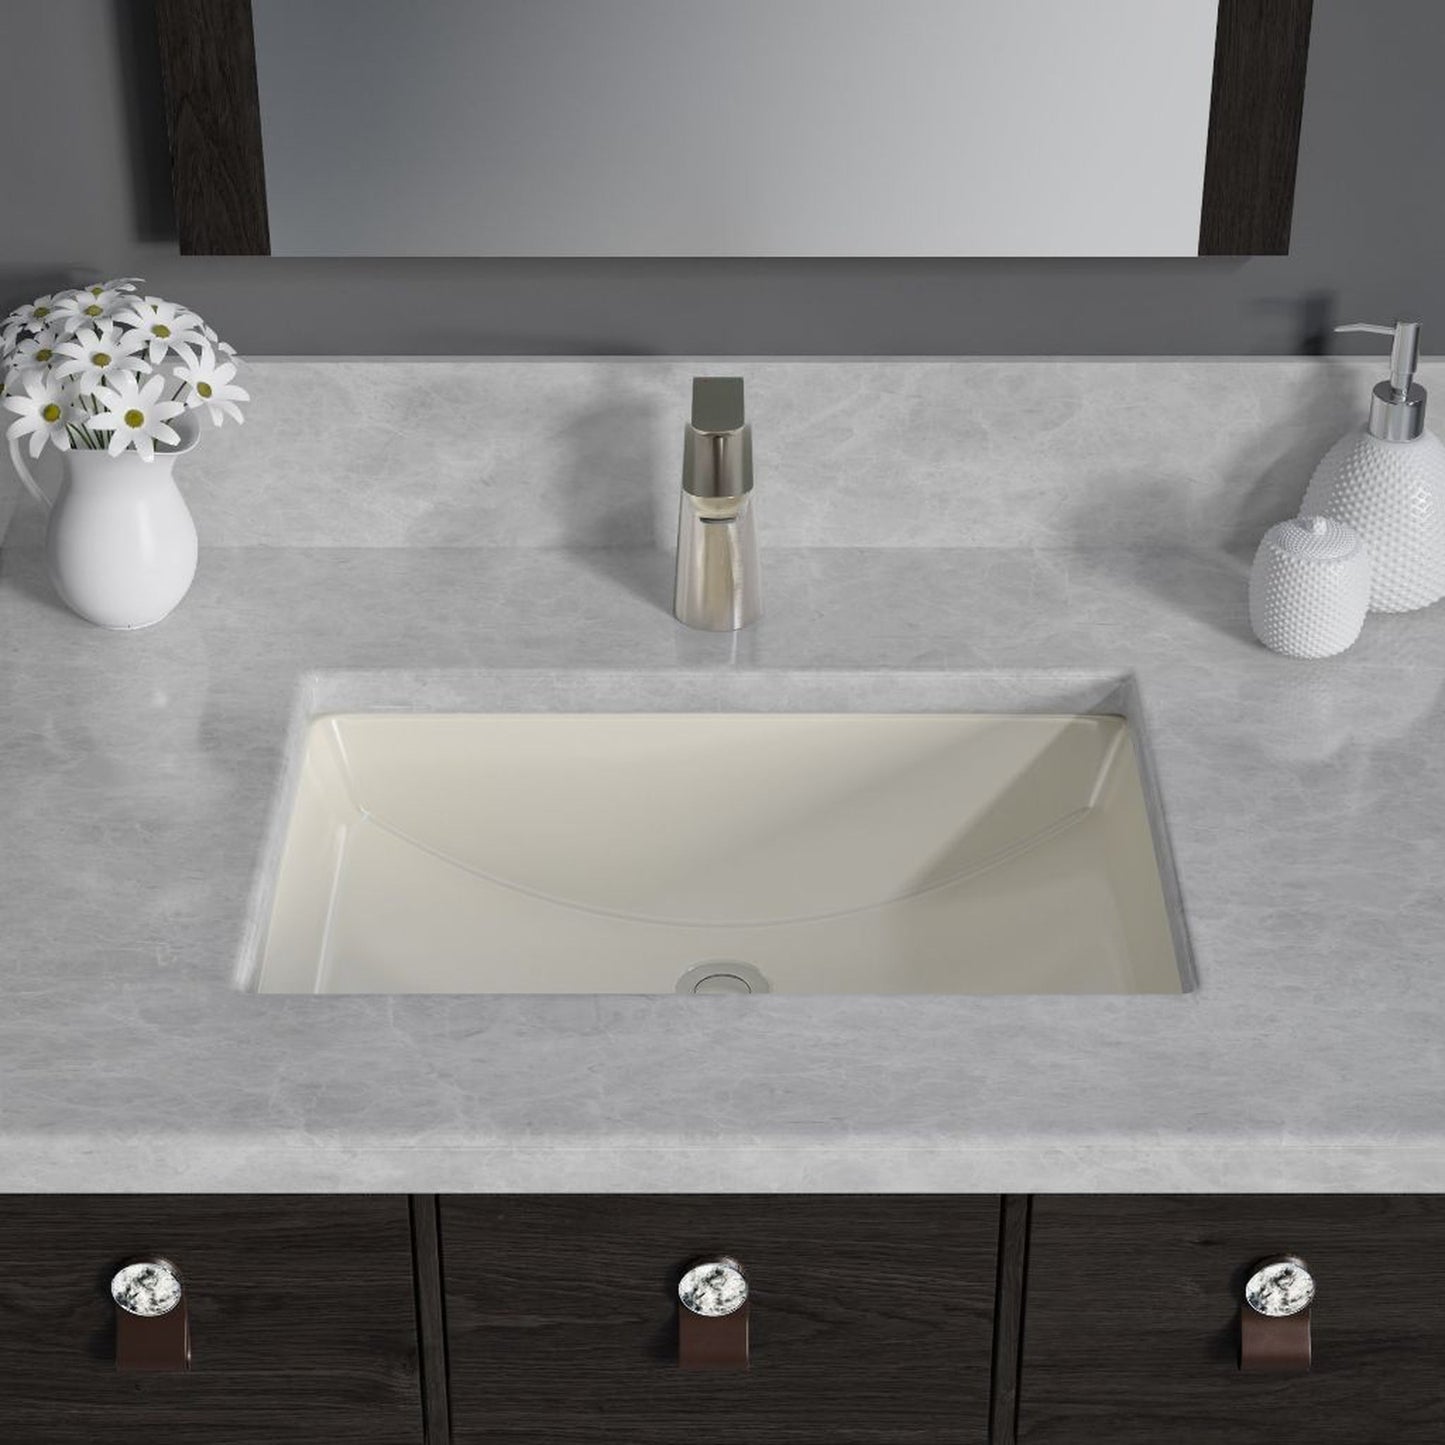 Allora USA 20.875" X 14.75" Biscuit Vitreous China Rectangular Porcelain Undermount Sink With Overflow